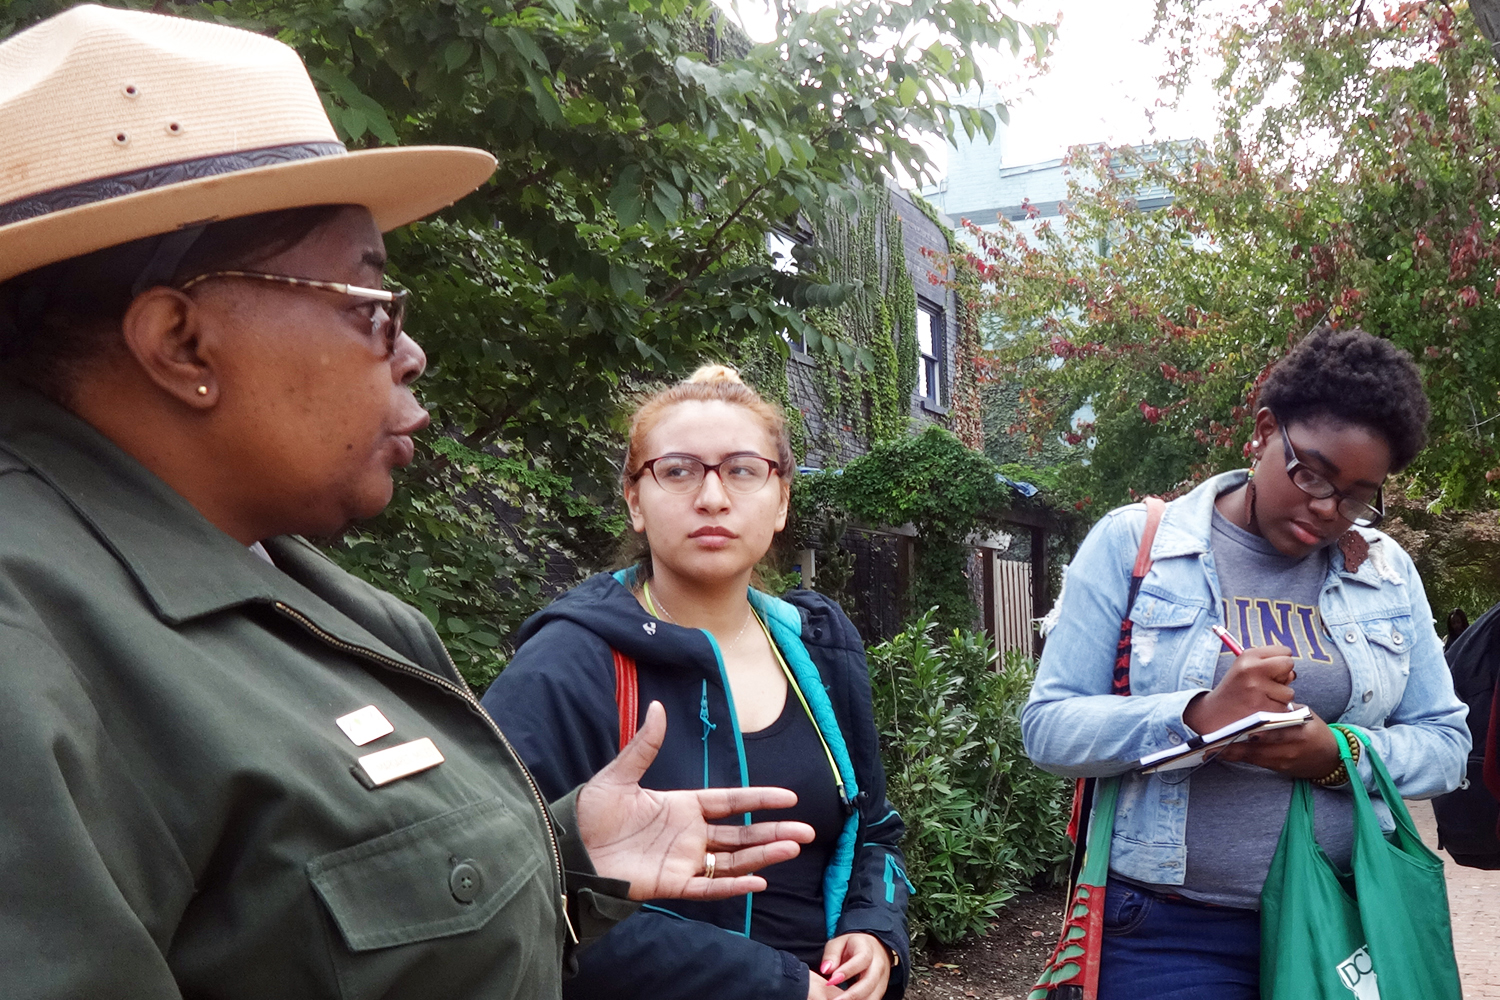 2016 DC Youth Summit Ranger and Students NPS Photo by Katie Crawford Lackey